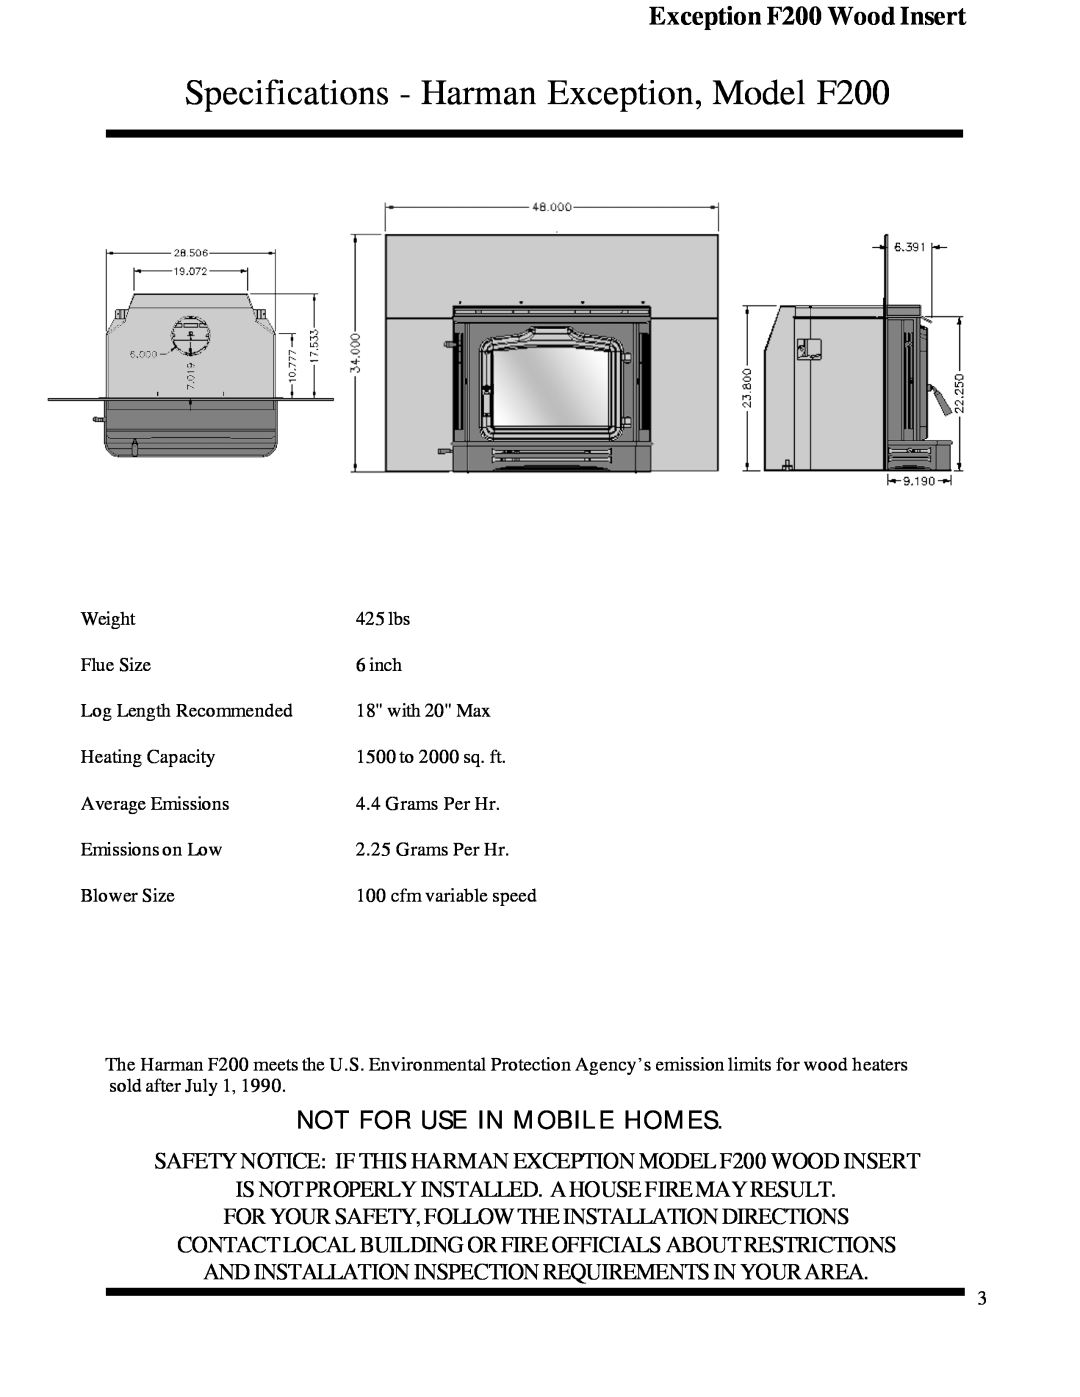 Harman Stove Company R7R1 Exception Wood Fireplace manual Specifications - Harman Exception, Model F200 